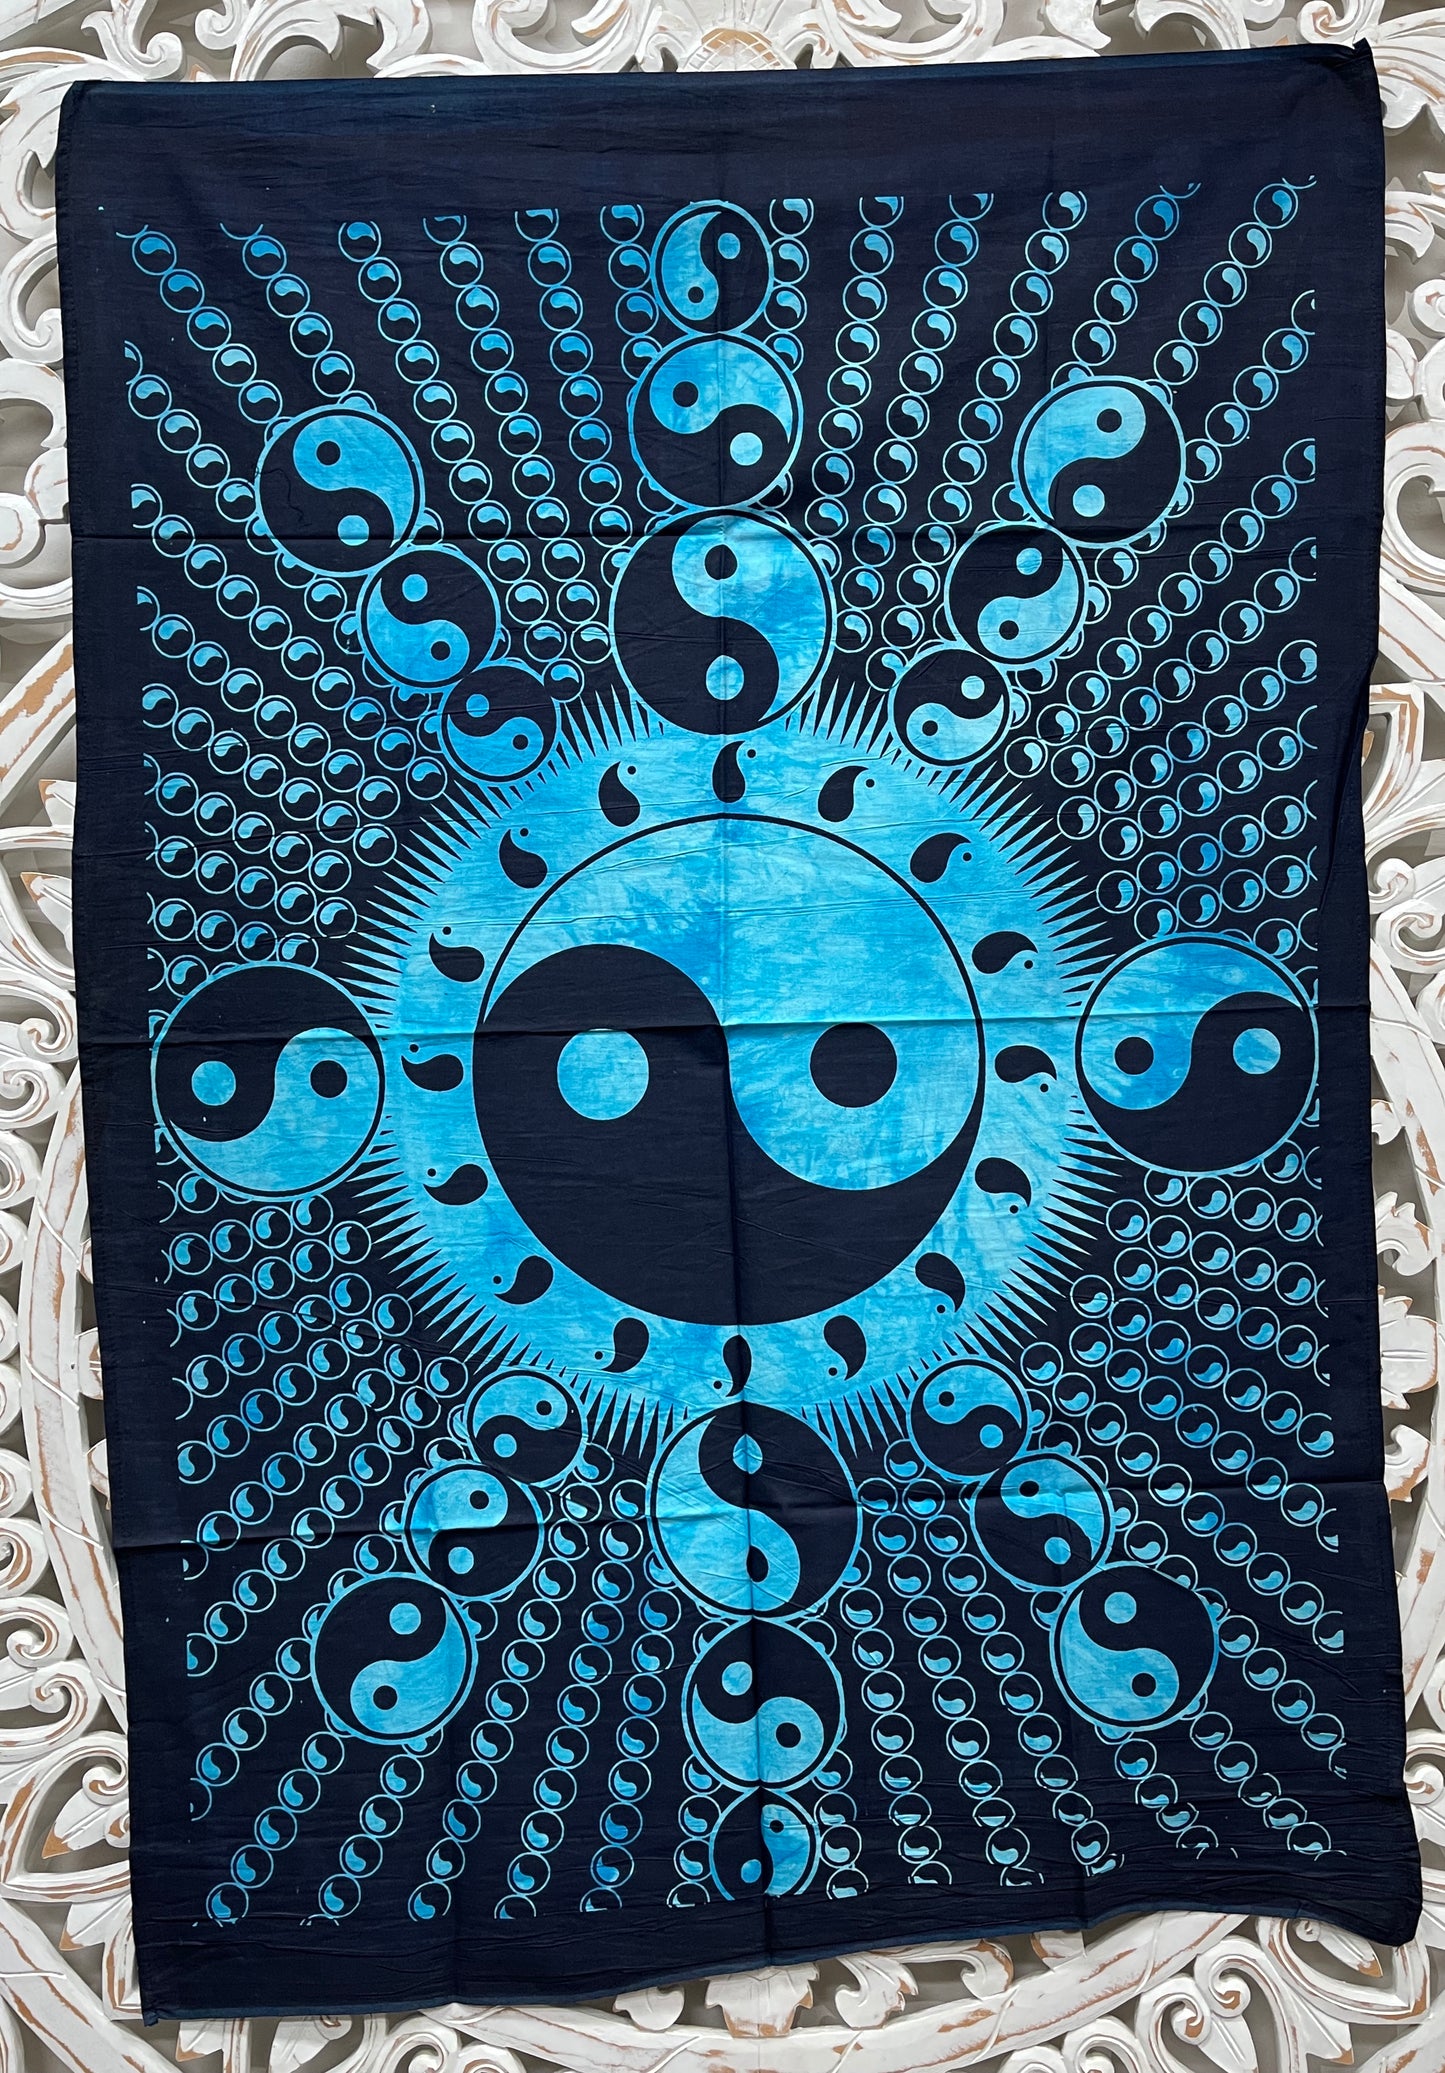 Hand printed Mini Fabric Posters Yin & Yang Tapestries Wall Hangings - Available in 5 colors